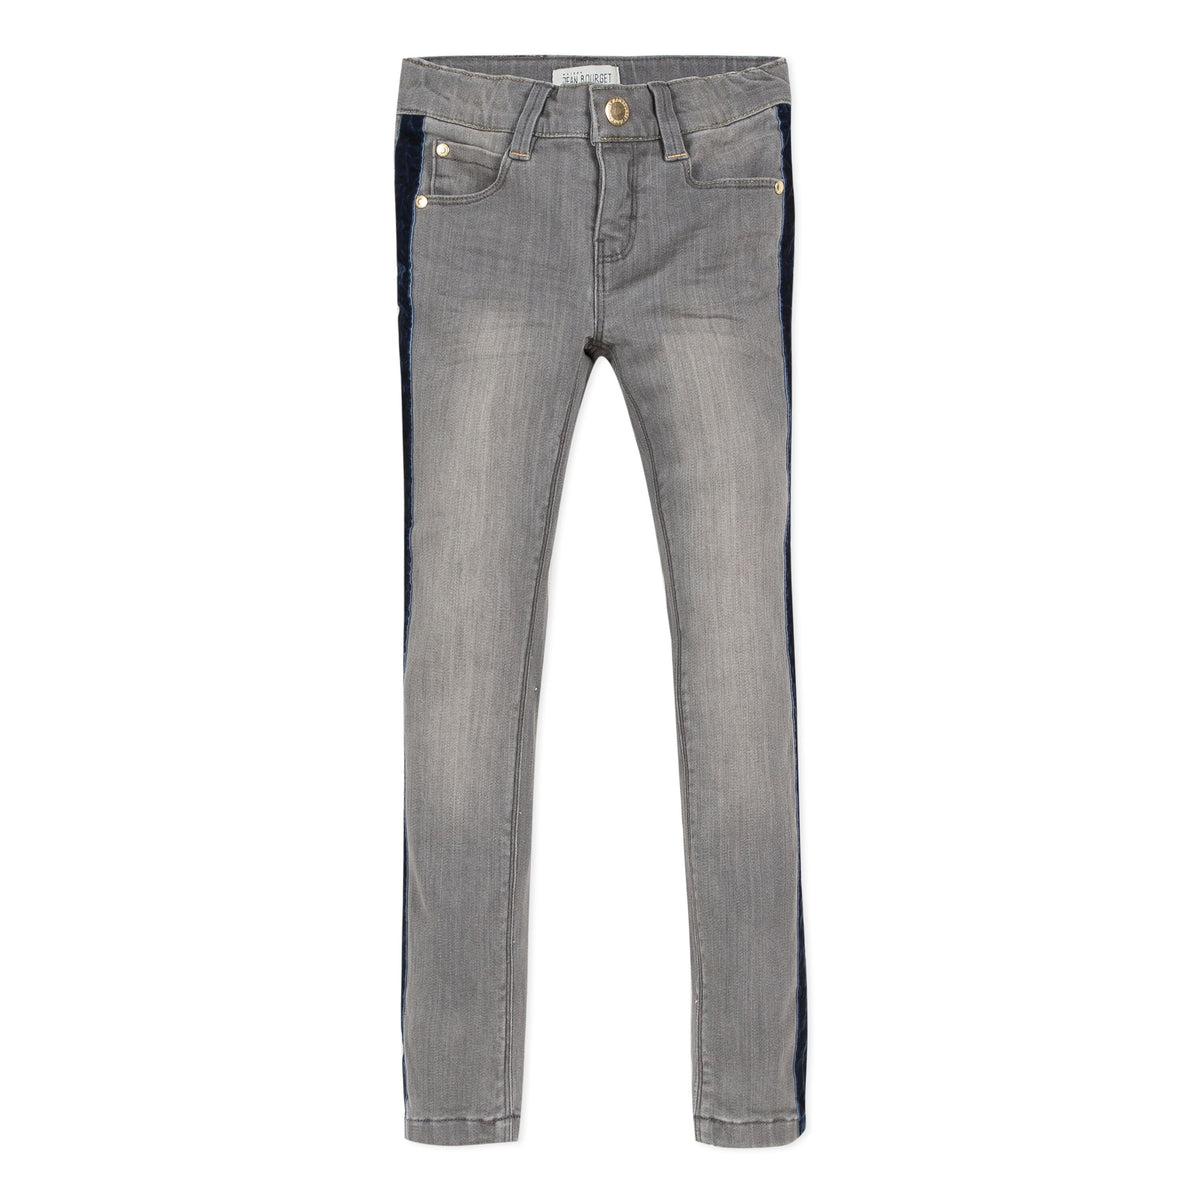 Jean Bourget classic dark grey striped denim pants near the body revisited with navy velvet